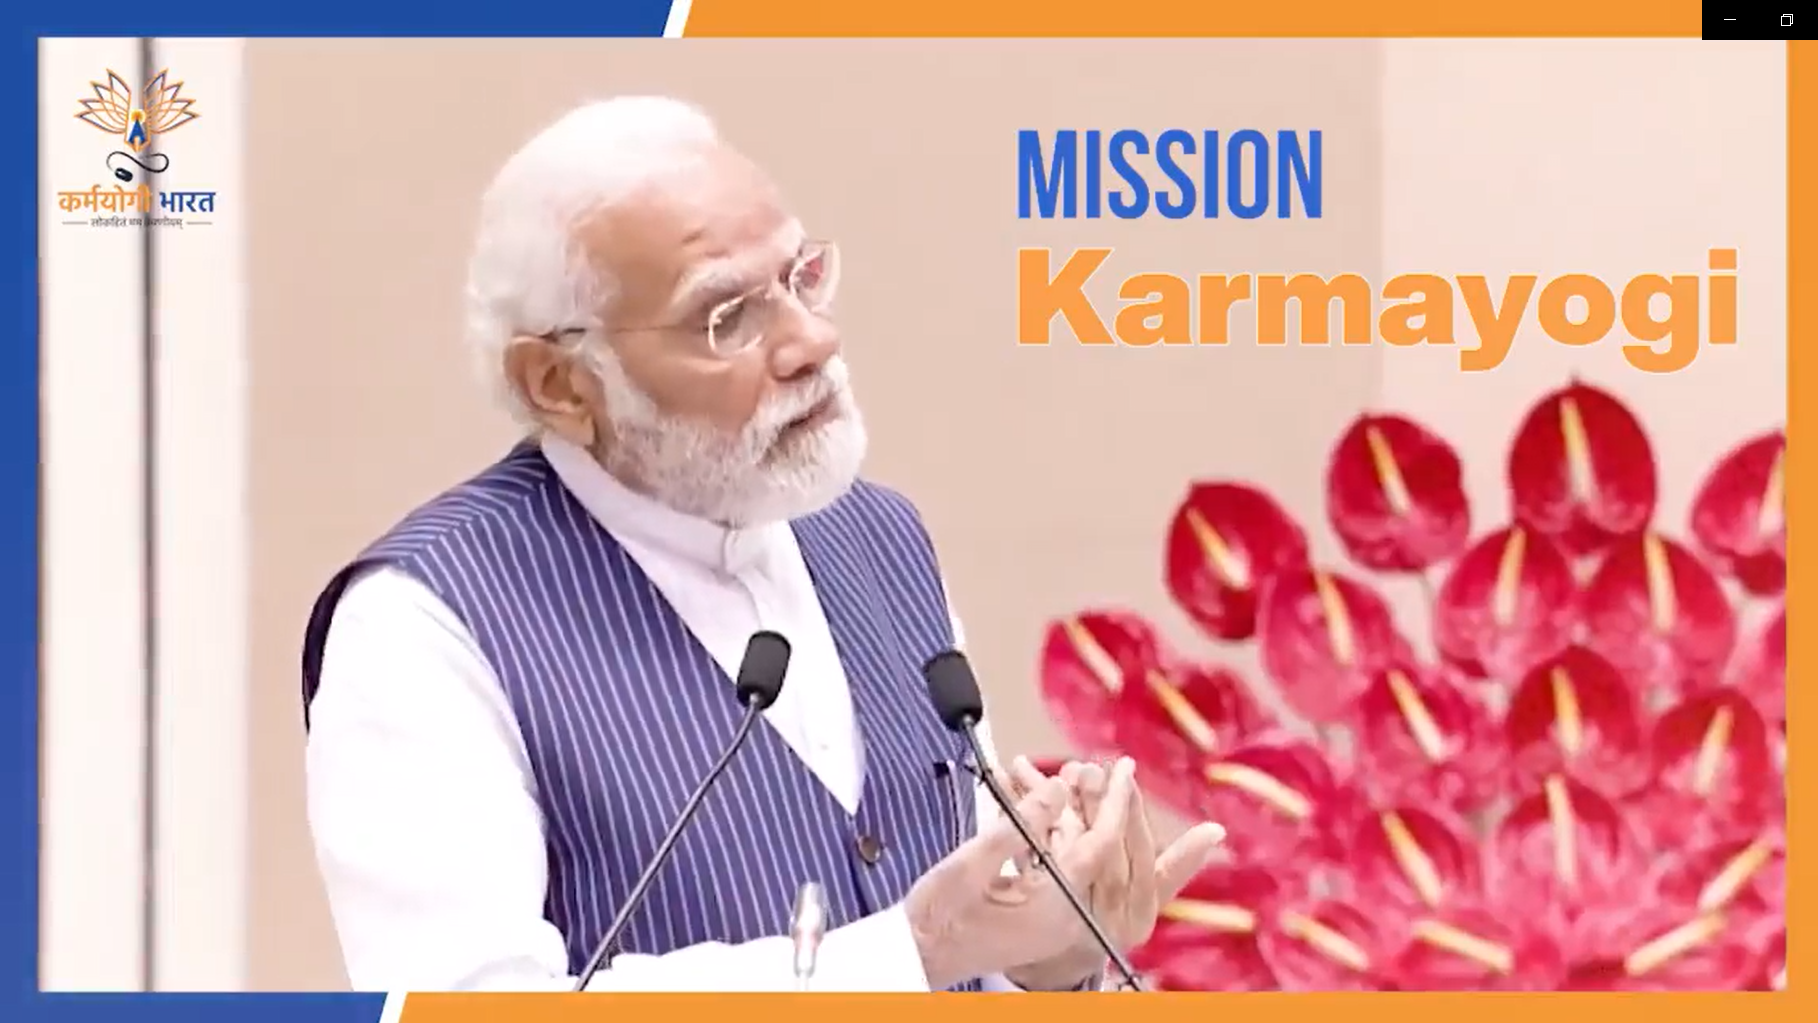 Mission Karmayogi: Hon’ble Prime Minister of India's address on National Civil Services Day related